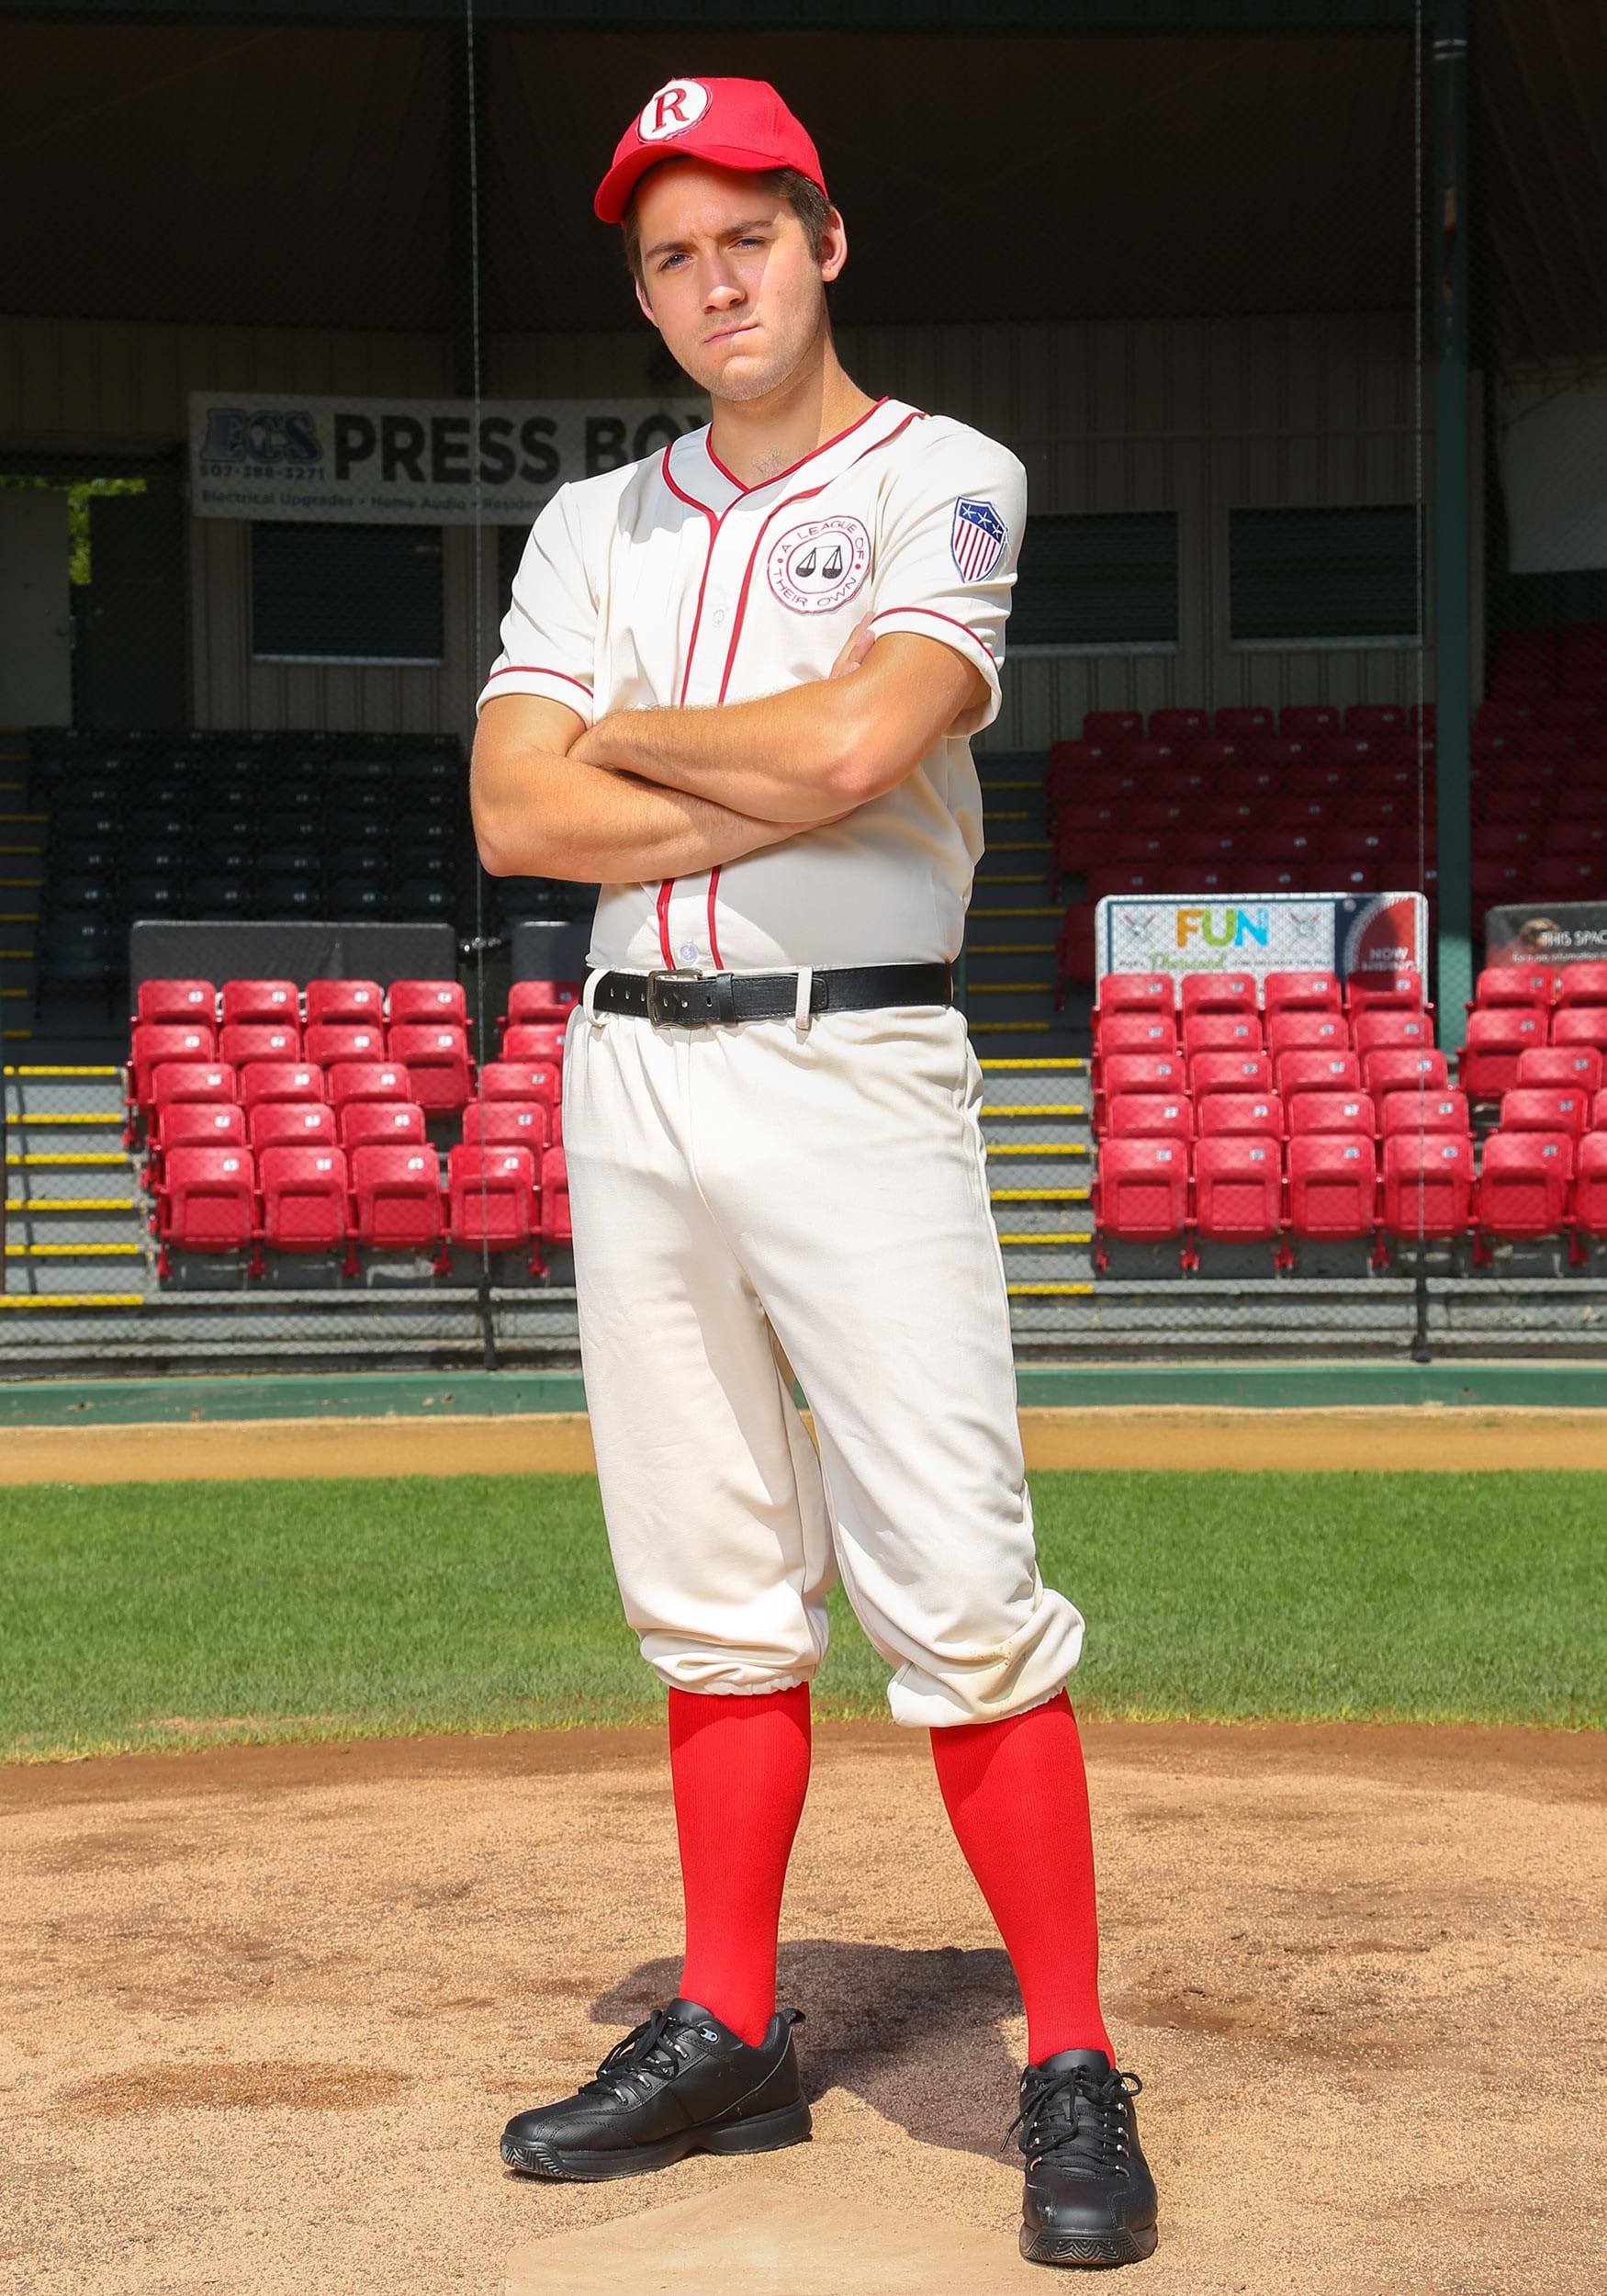 A League Of Their Own Coach Jimmy Men's Costume , Exclusive